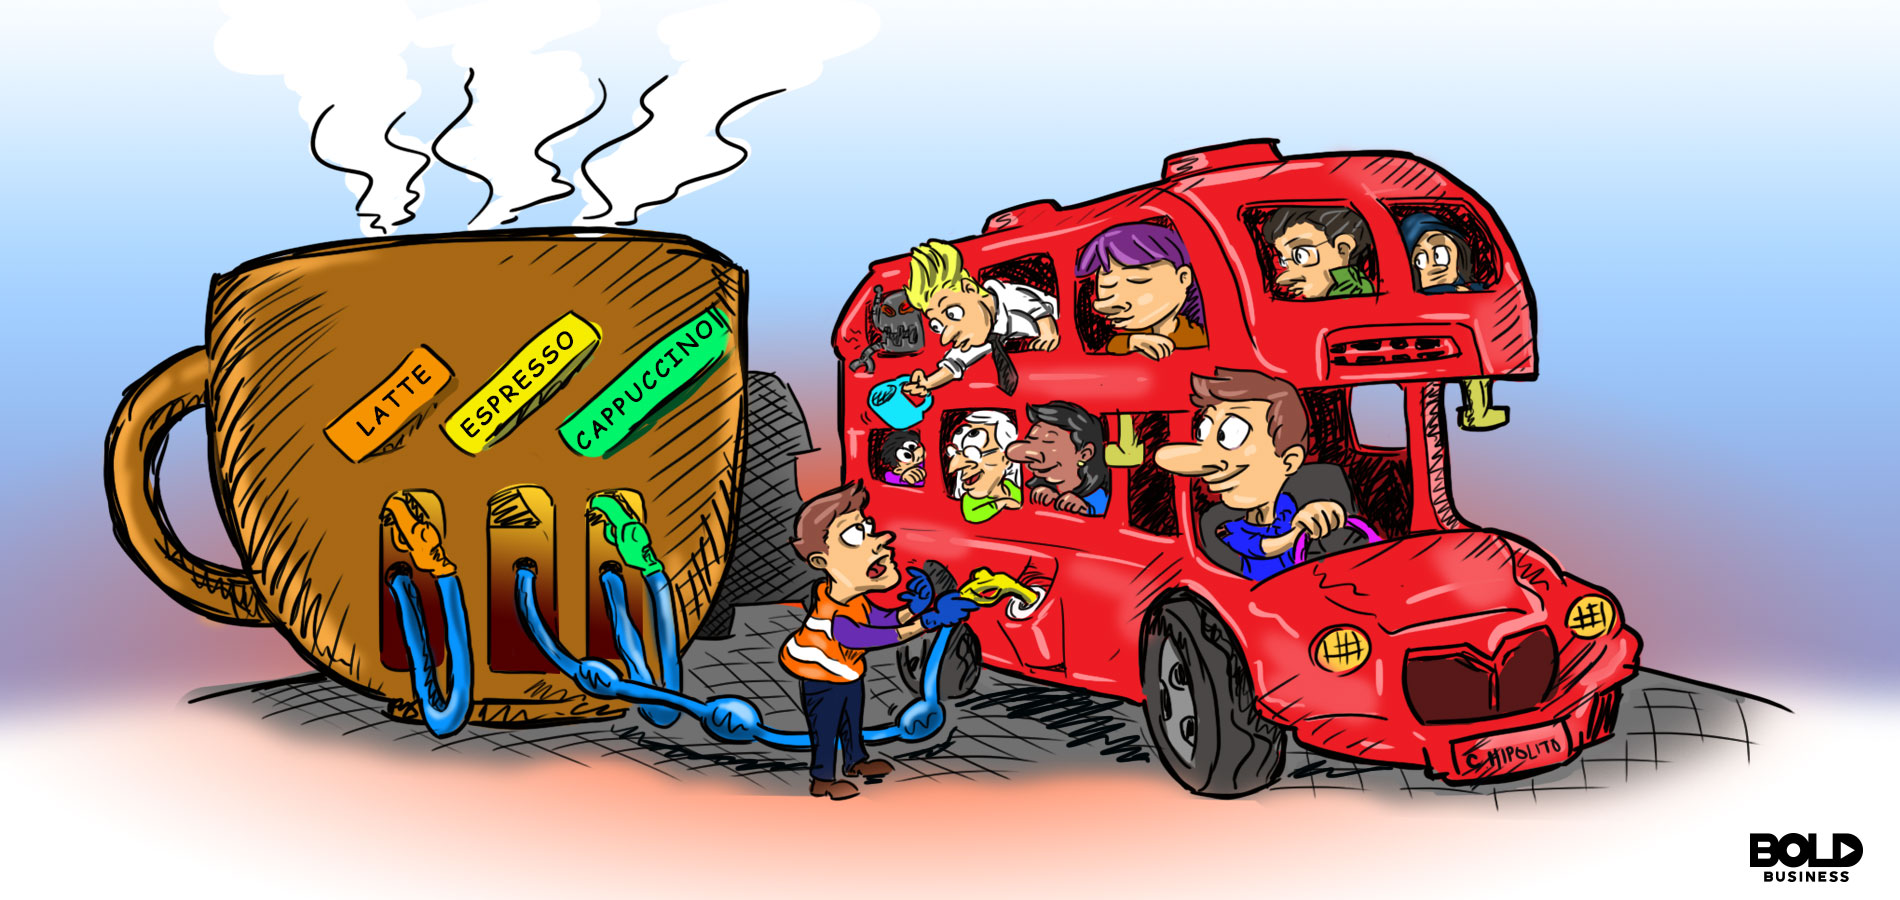 illustrated cartoon of coffee grounds biofuel powering up the engine of a double-decker bus